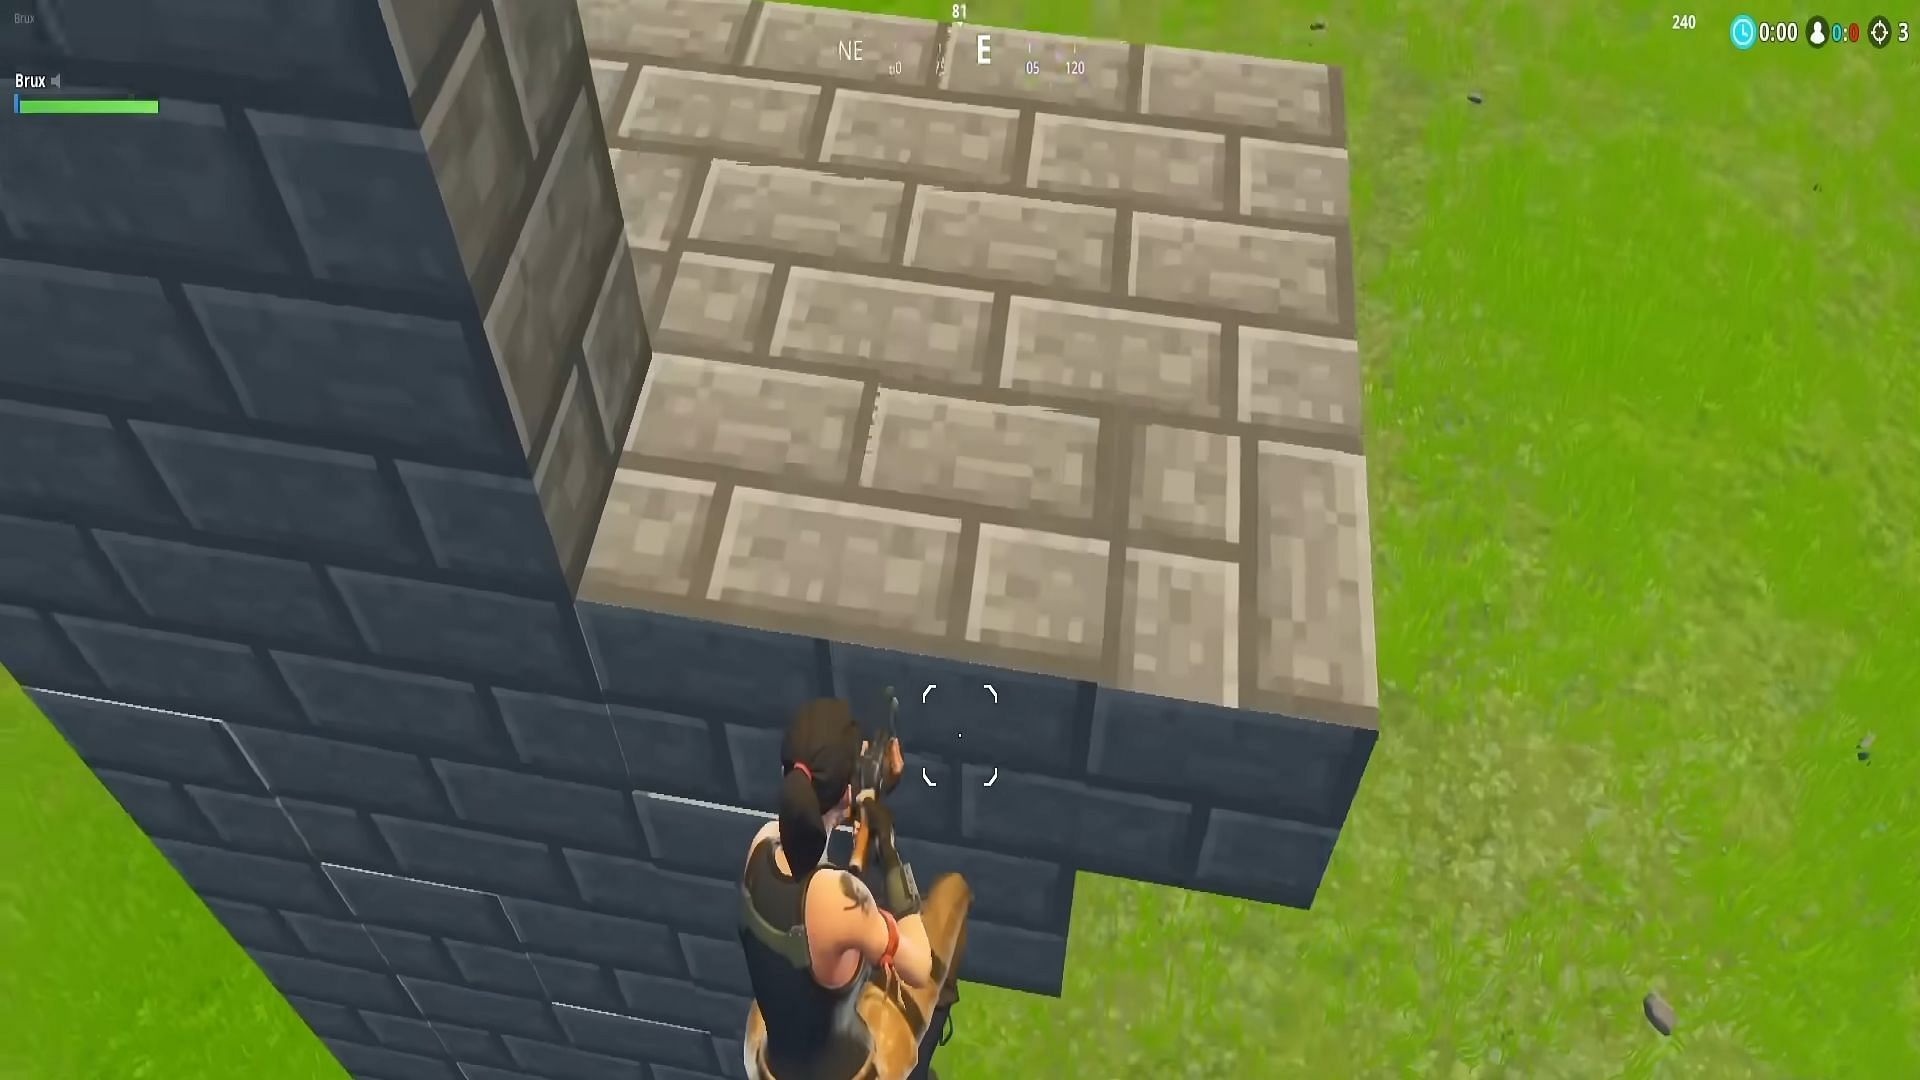 Minecraft enters Fortnite in the most entertaining way possible (Image via YouTube/Brux)